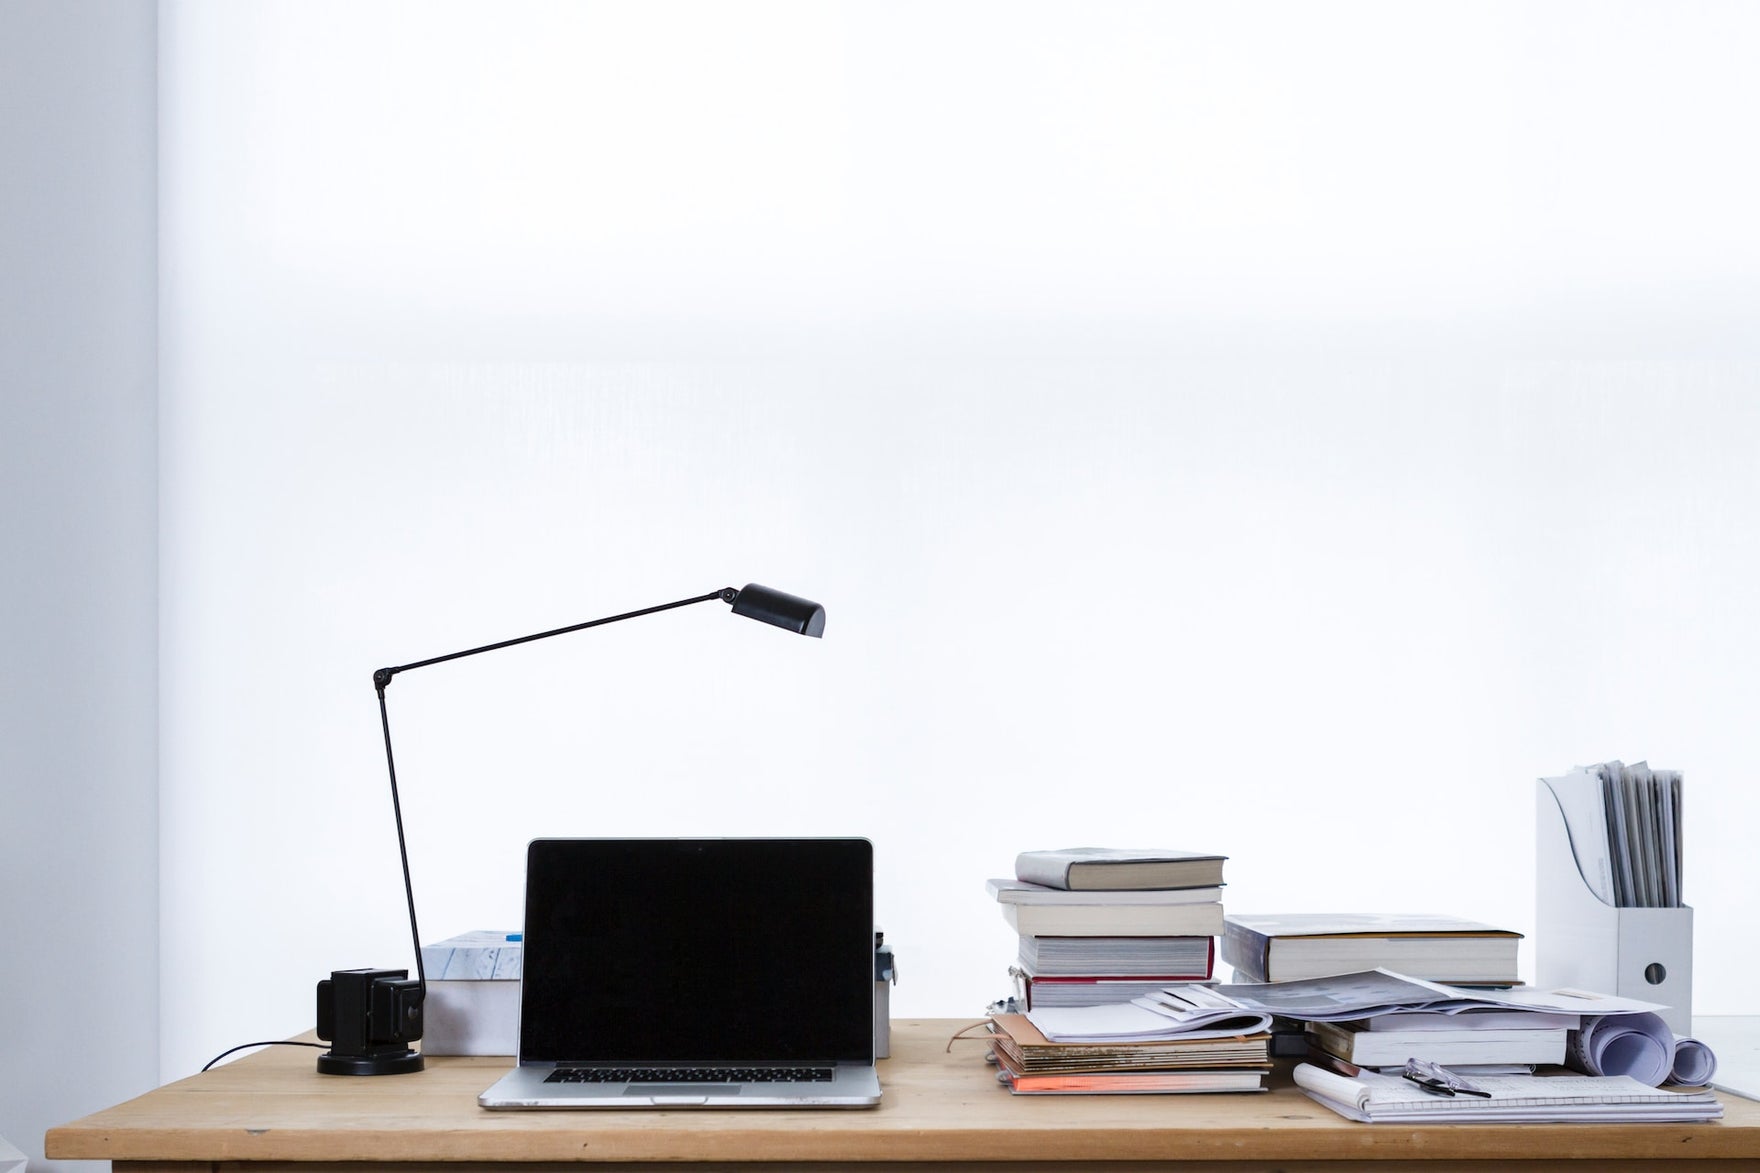 A desk with a computer, a lamp, and a messy stack of books.